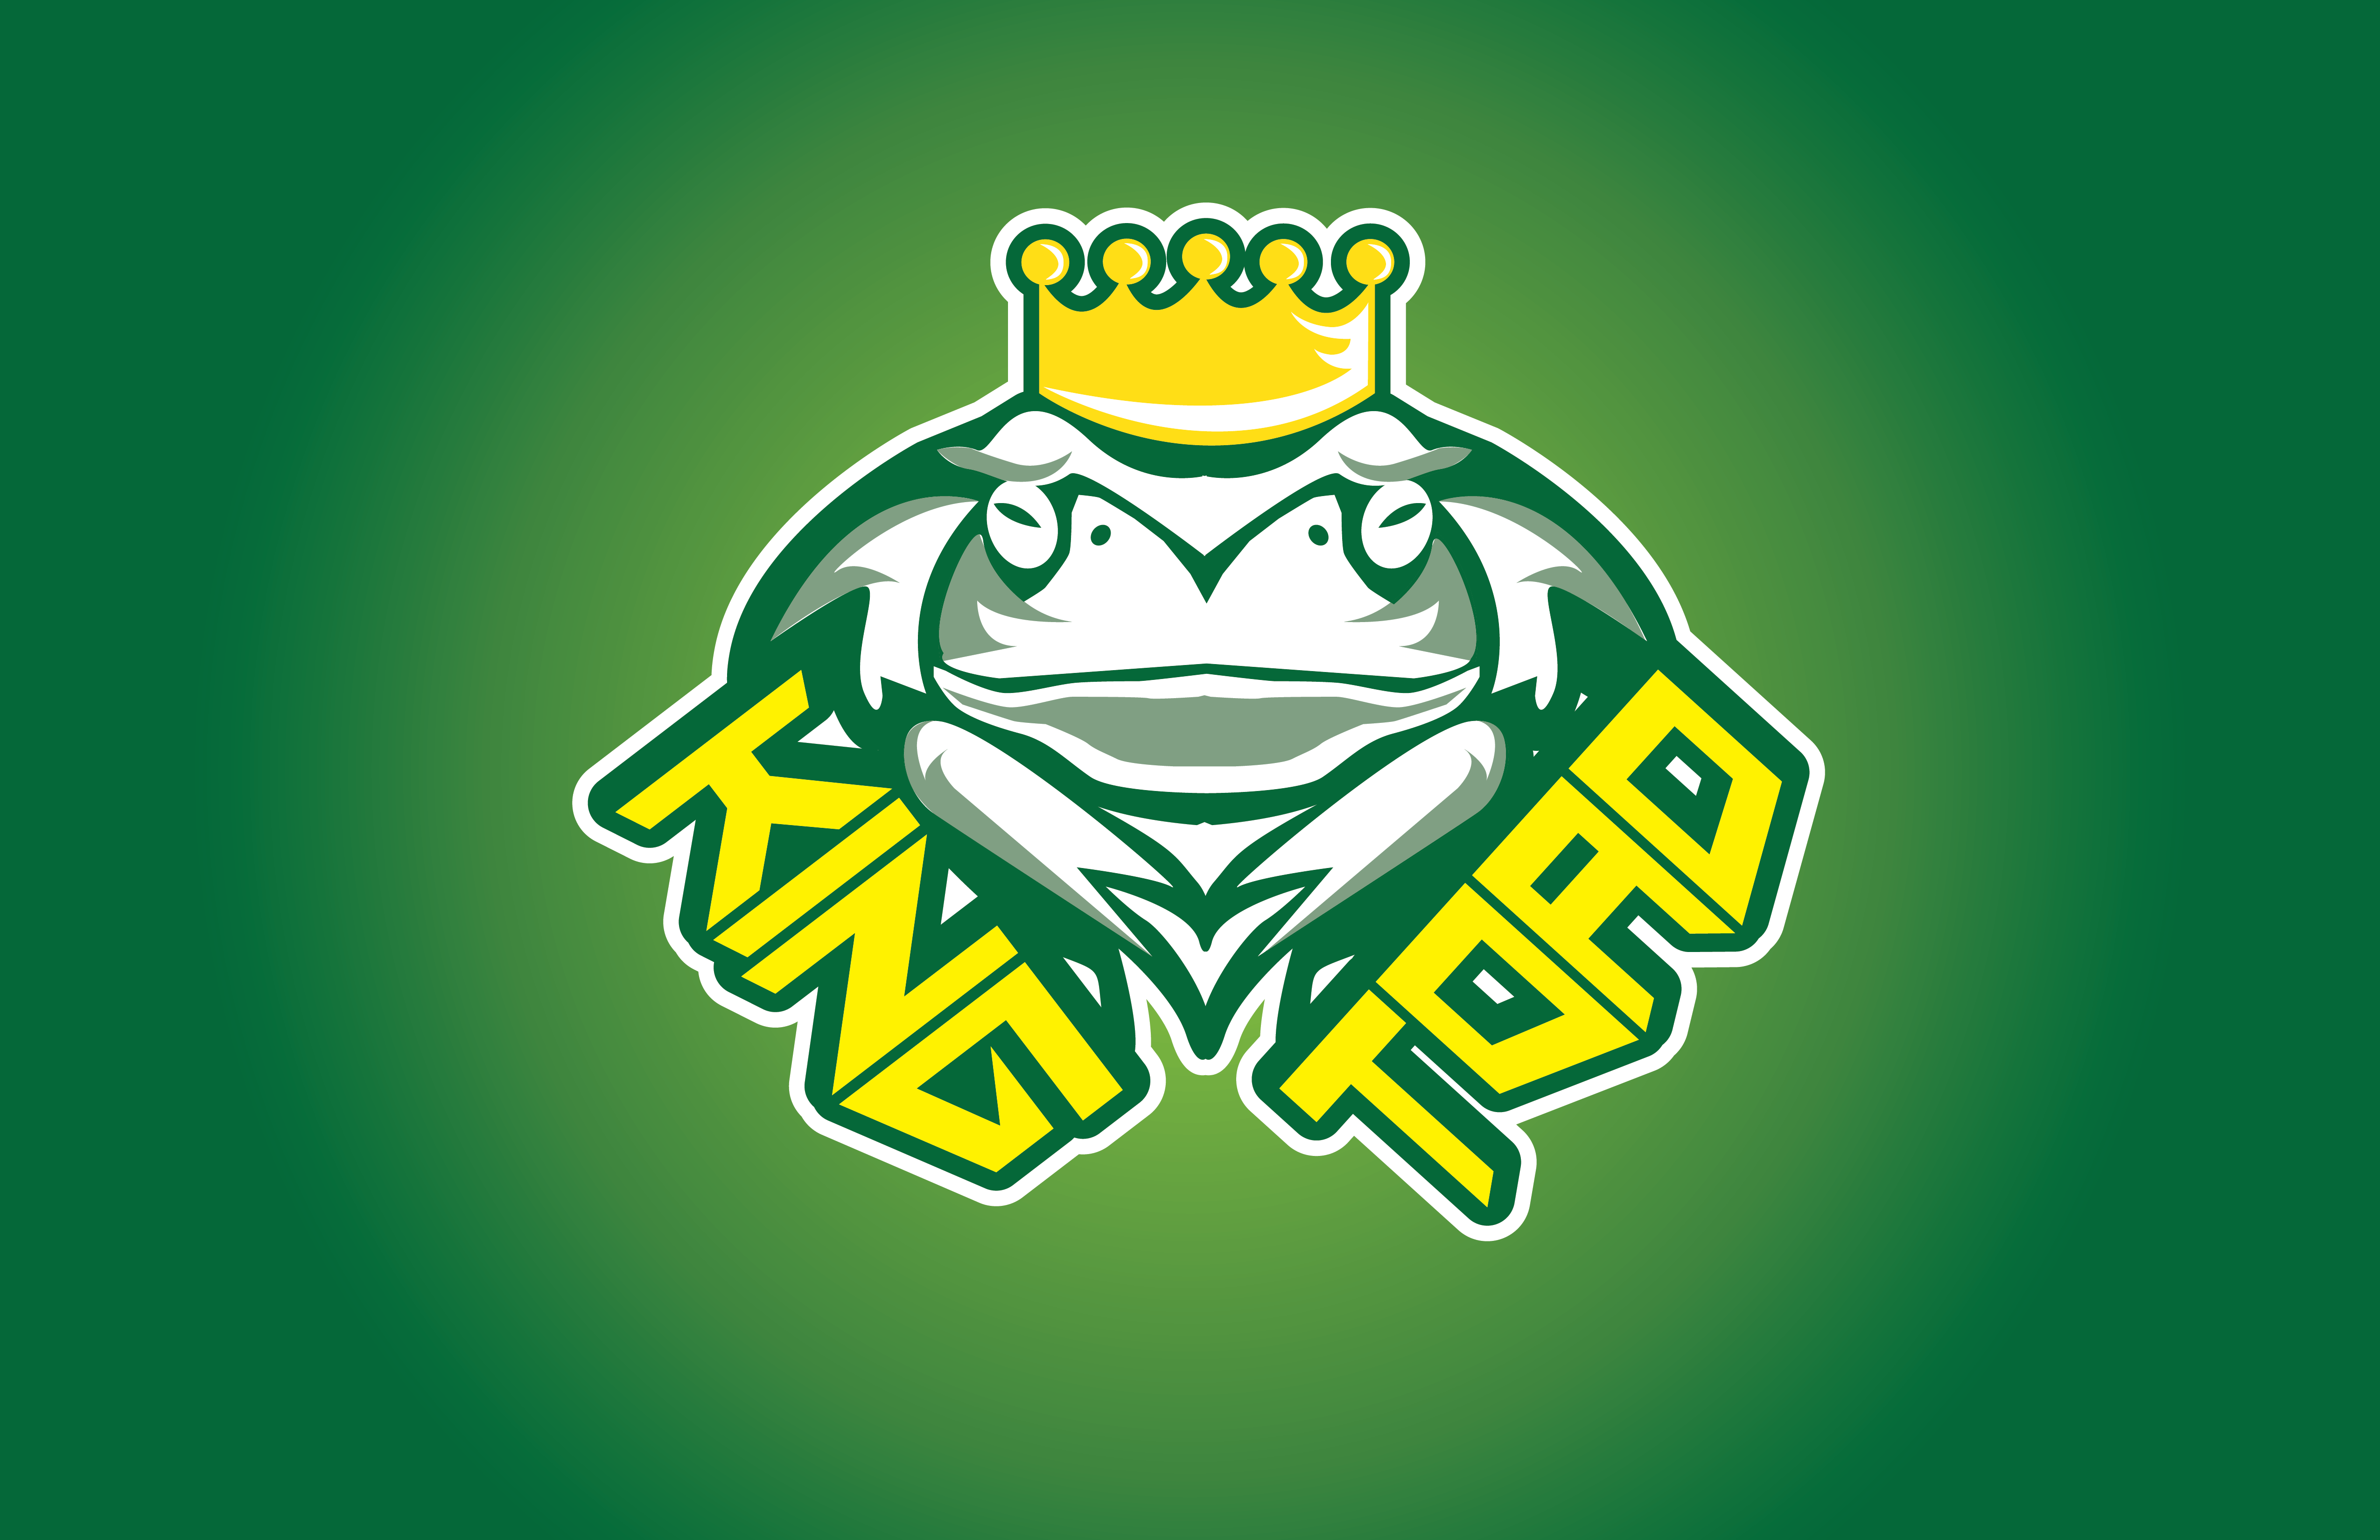 Frog Sports Logo - My first stab at the E-Sports style logos I've been seeing! 